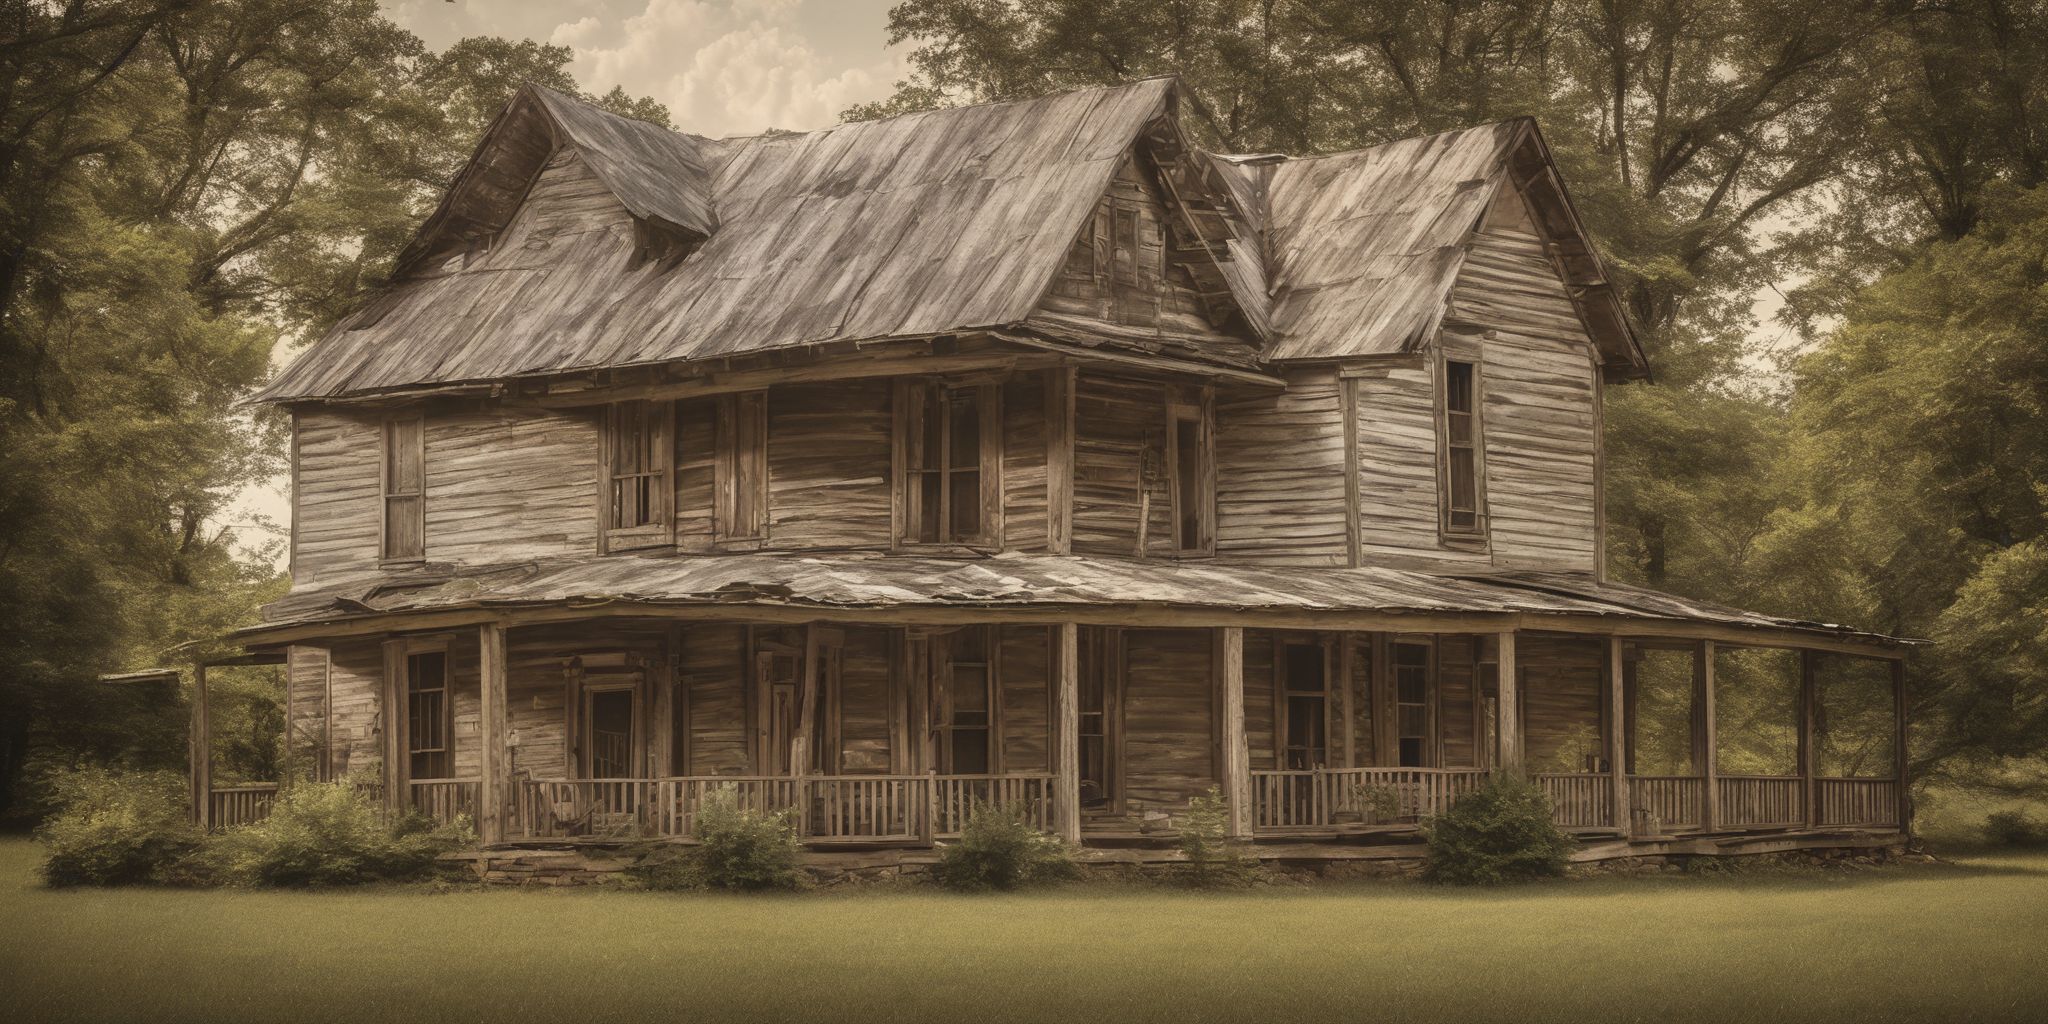 Credit Unions Tennessee: Homestead  in realistic, photographic style